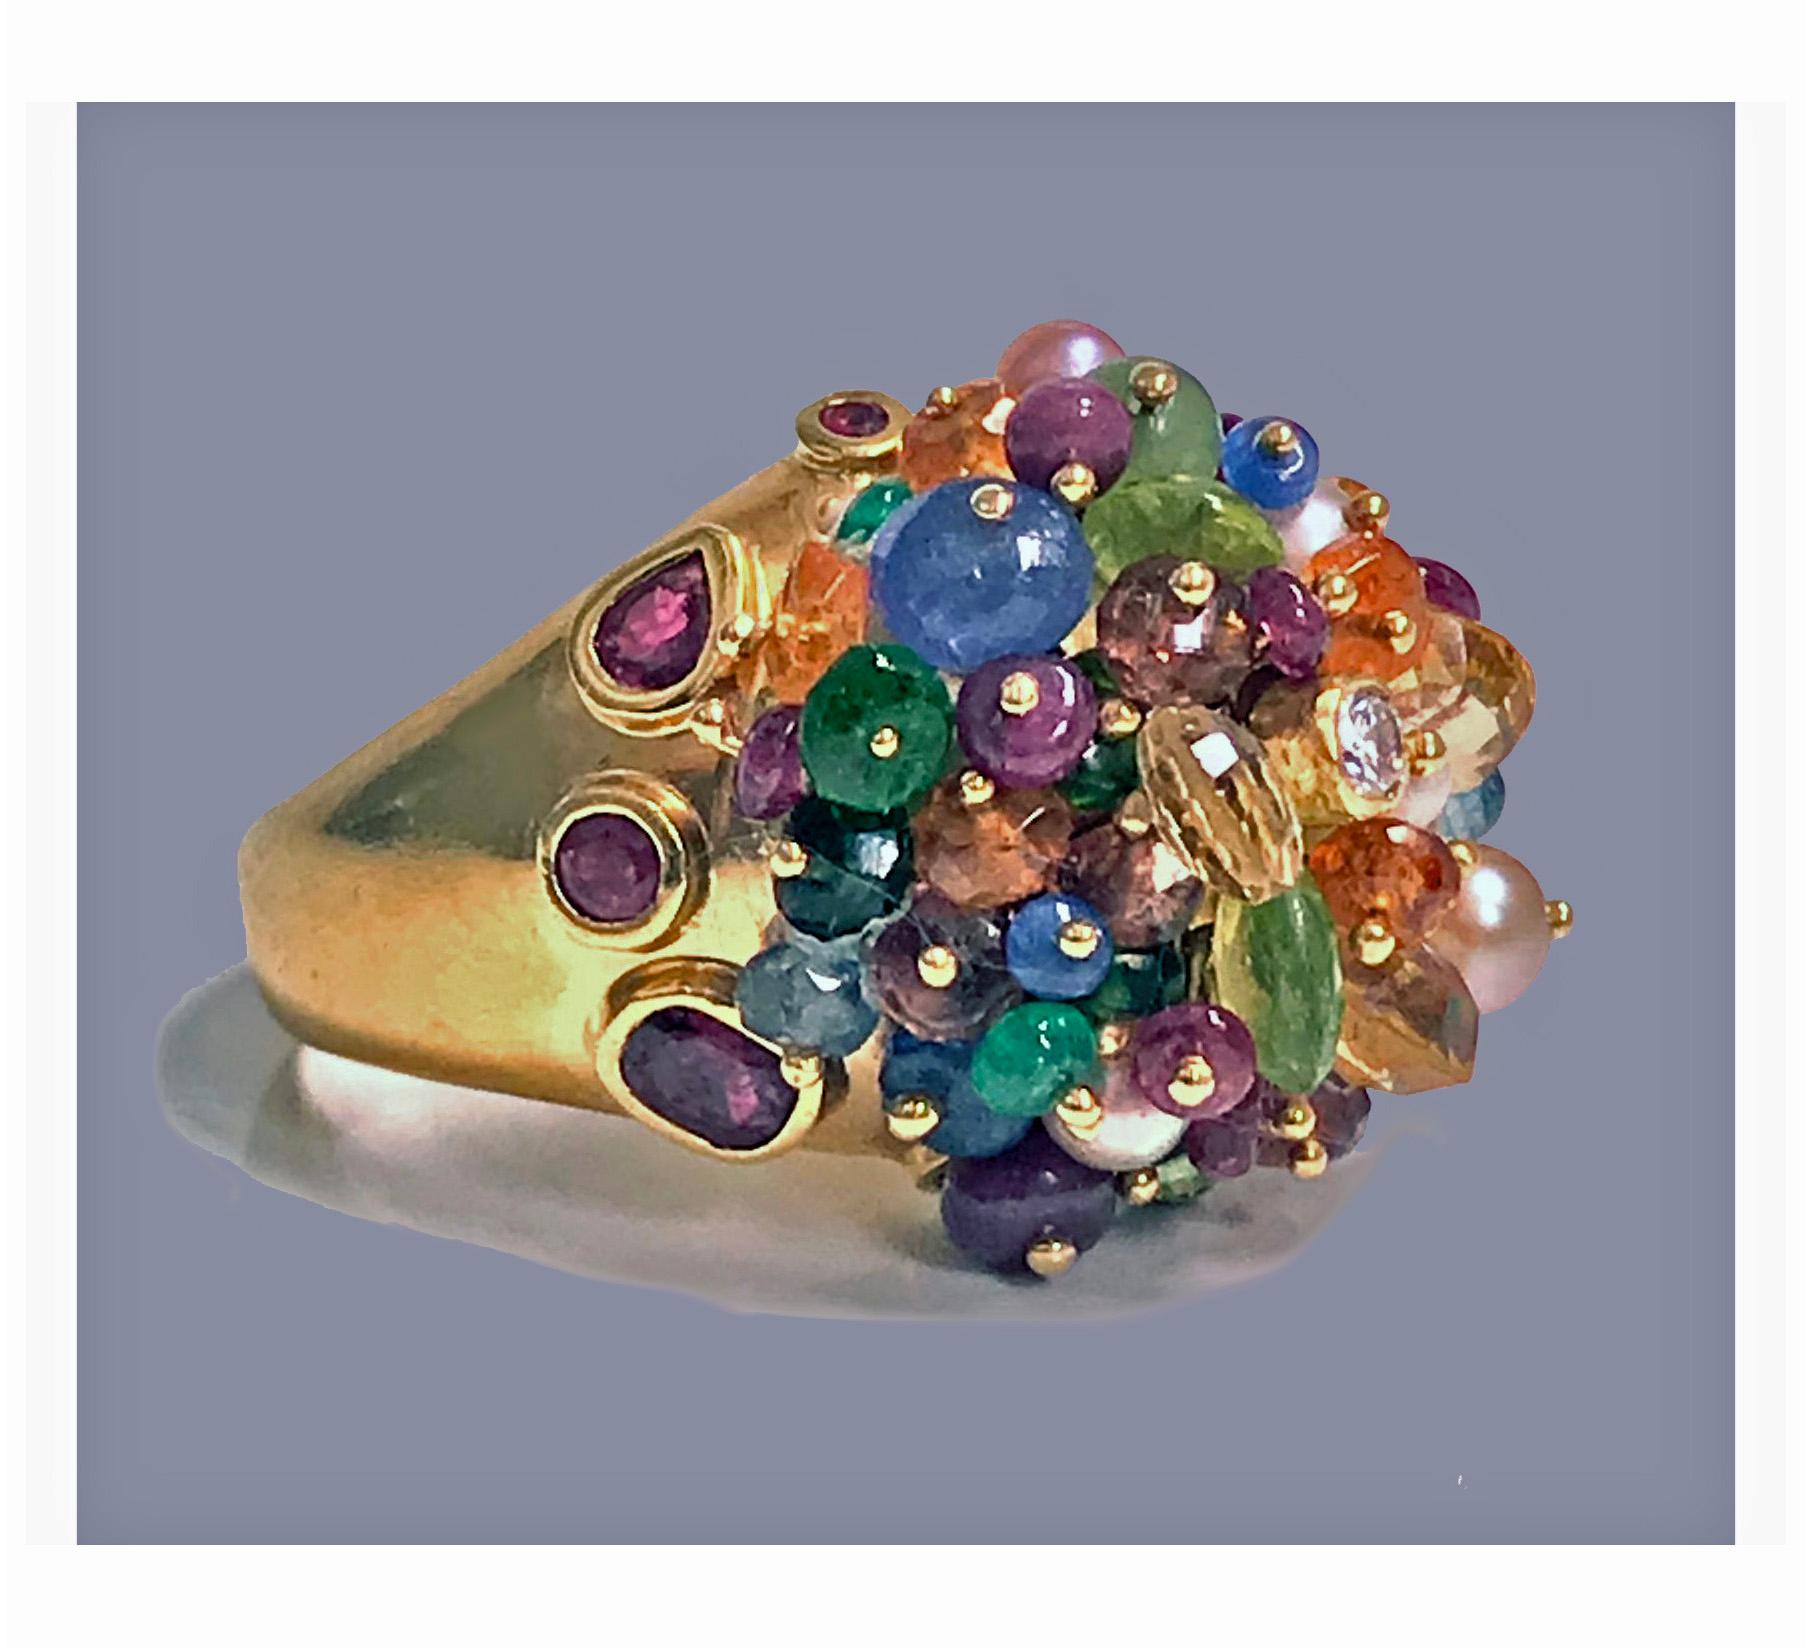 1950s French 18-karat multi gem tutti frutti dome cocktail ring. The ring set with multi gemstones including, diamond, ruby, sapphire, pearl, emerald, quartz and peridot. French export mark and maker’s mark in lozenge, possibly JL. Total item